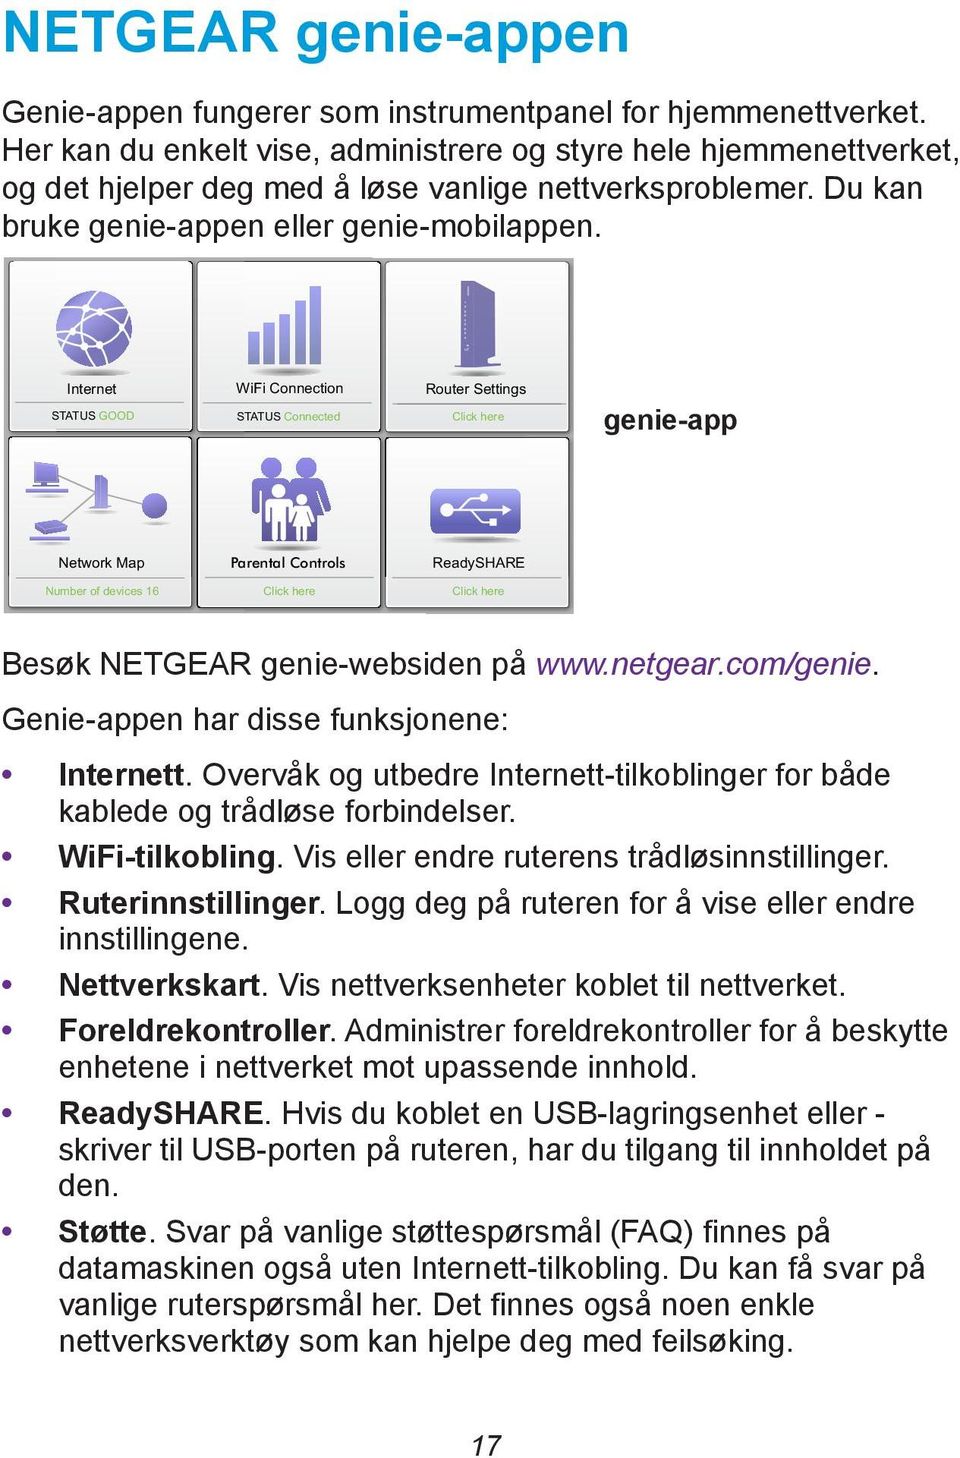 Internet STATUS GOOD WiFi Connection STATUS Connected Router Settings Click here genie-app Network Map Parental Controls ReadySHARE Number of devices 16 Click here Click here Besøk NETGEAR